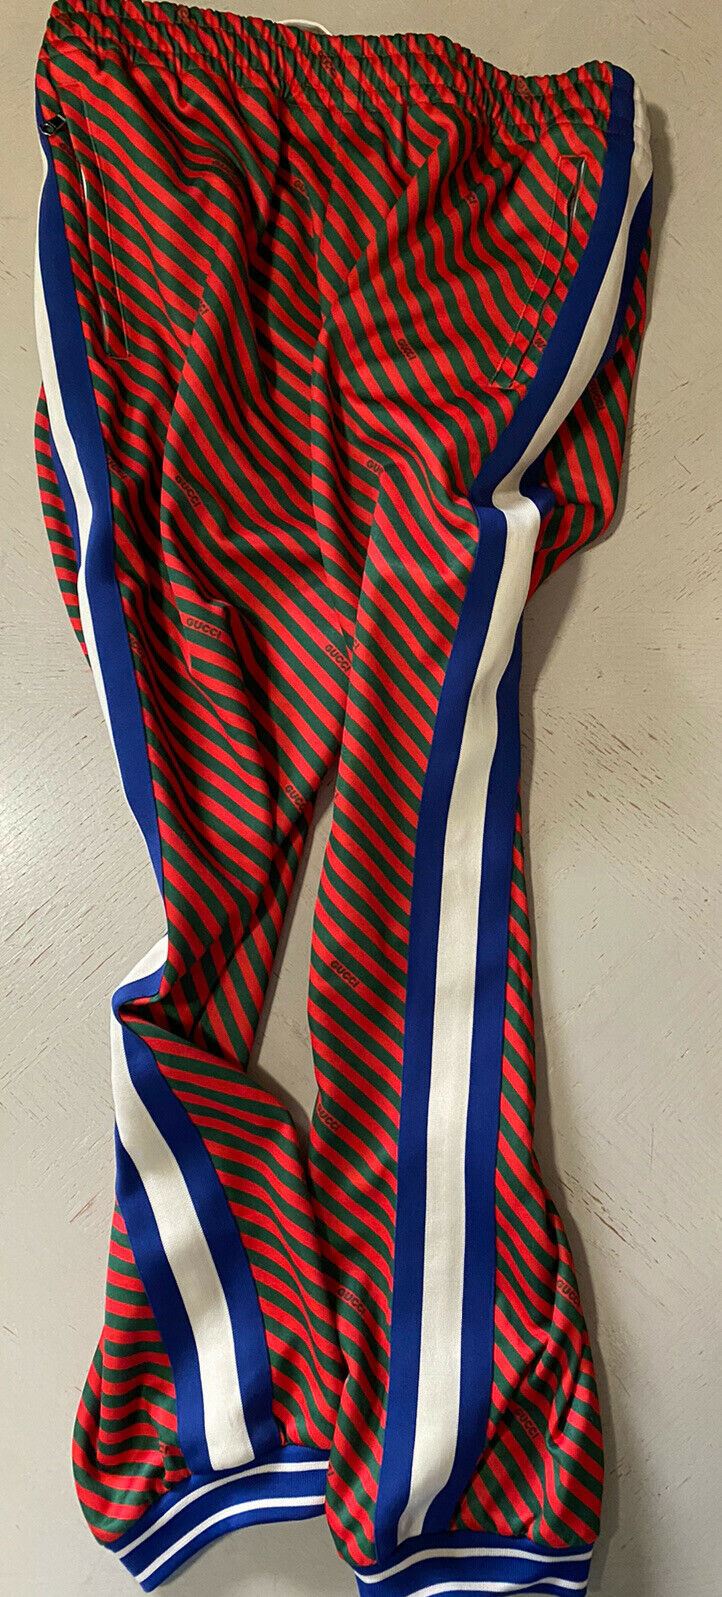 New $1500 Gucci Mens Sweatpants Blue/Red/Green Size XXL Italy